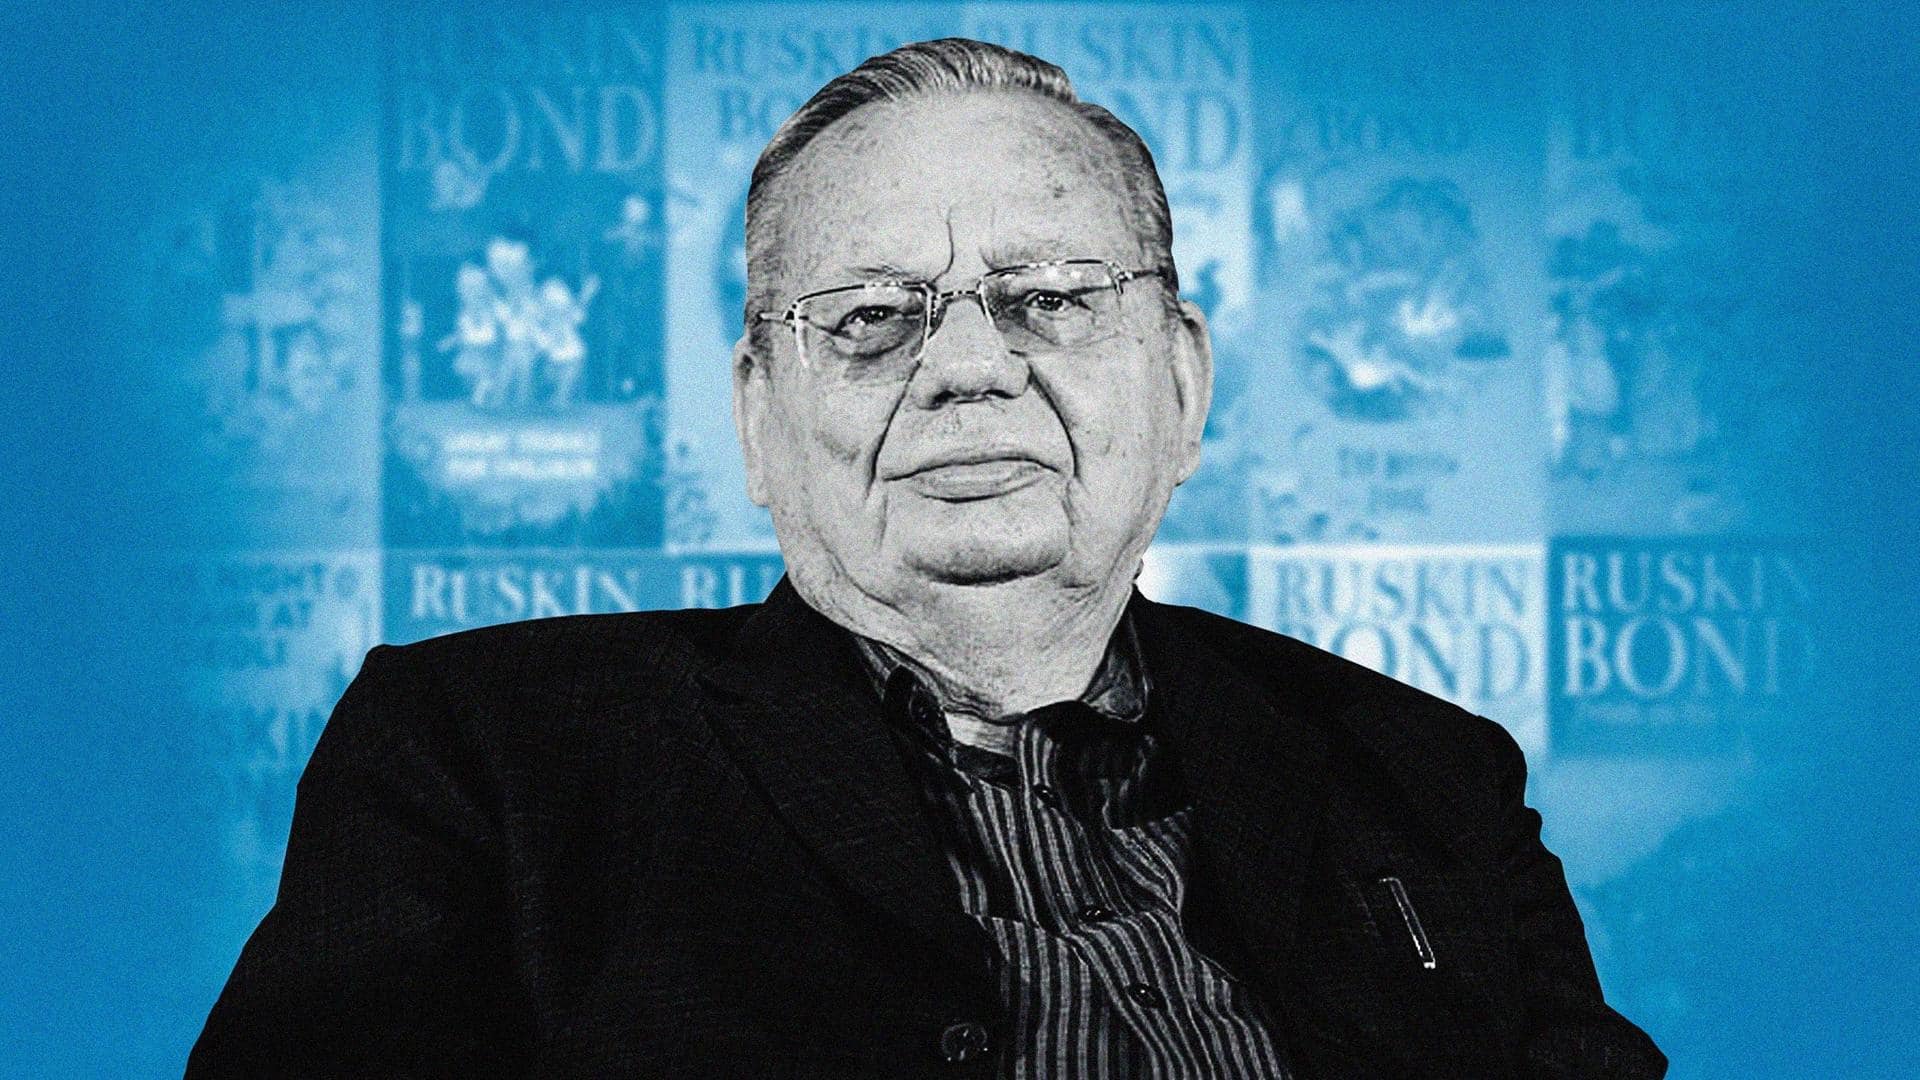 Happy Birthday, Ruskin Bond! A look at his top books